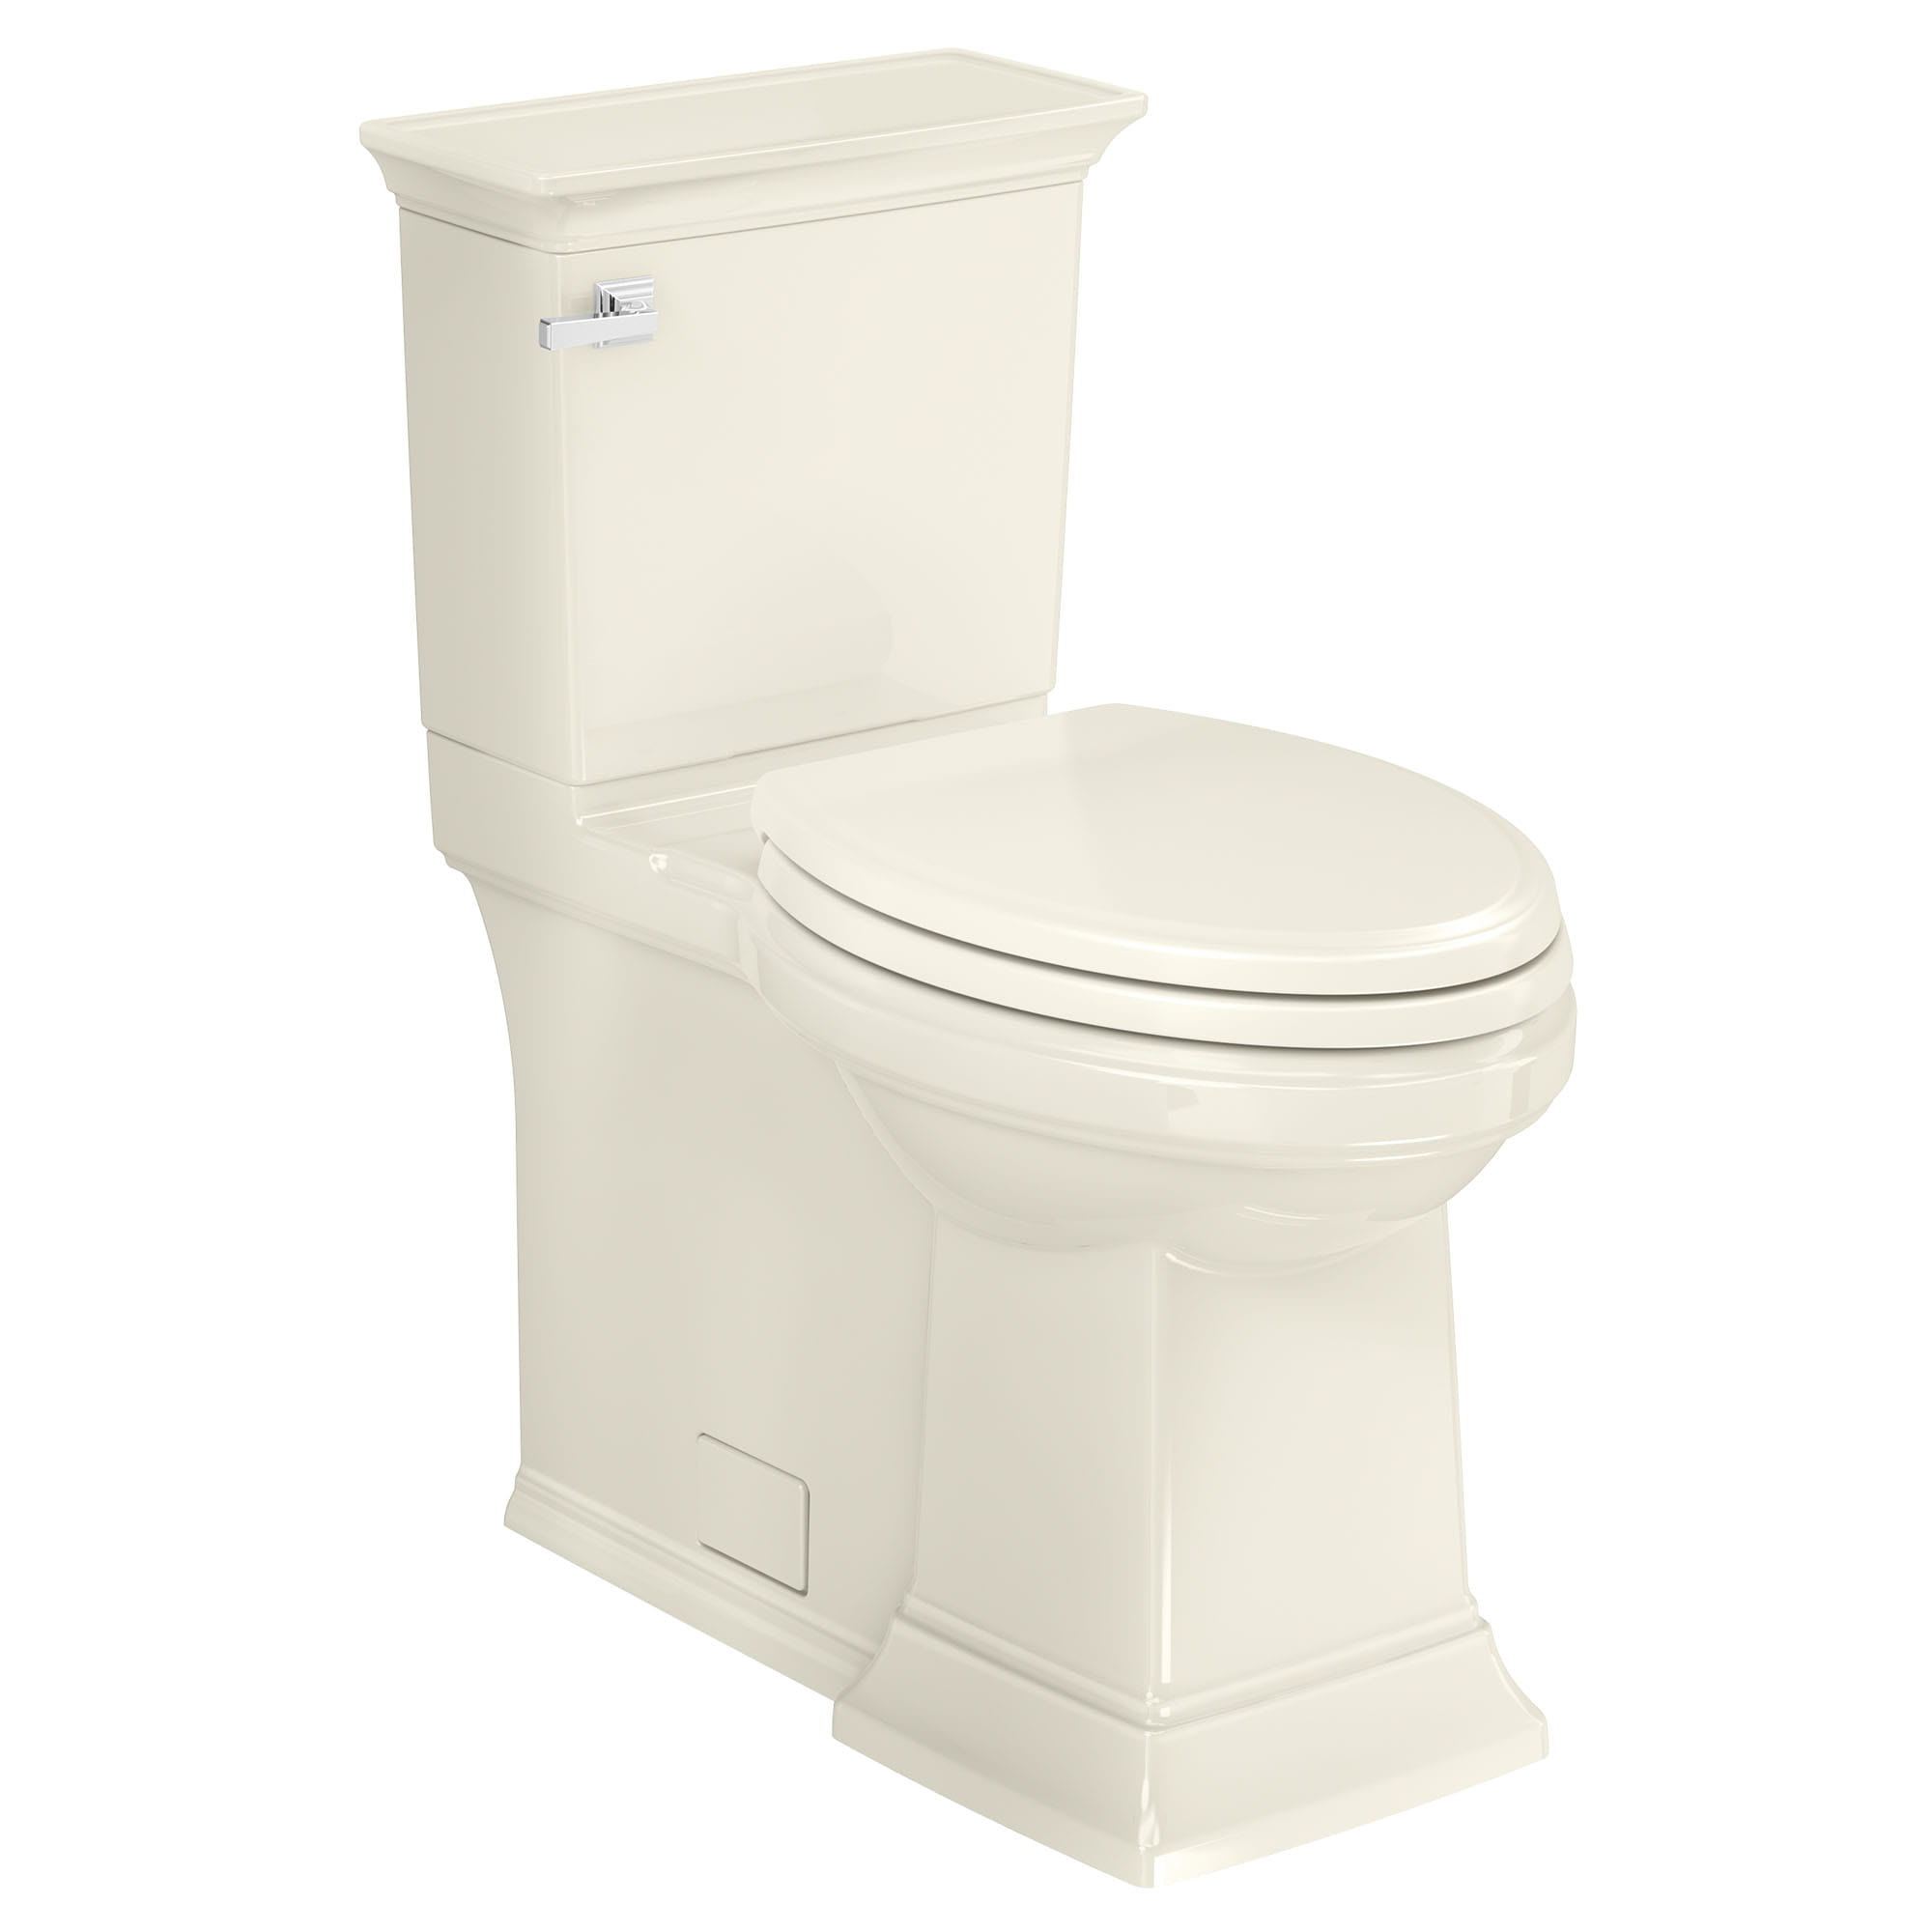 Town Square® S Skirted Two-Piece 1.28 gpf/4.8 Lpf Chair Height Elongated Toilet With Seat